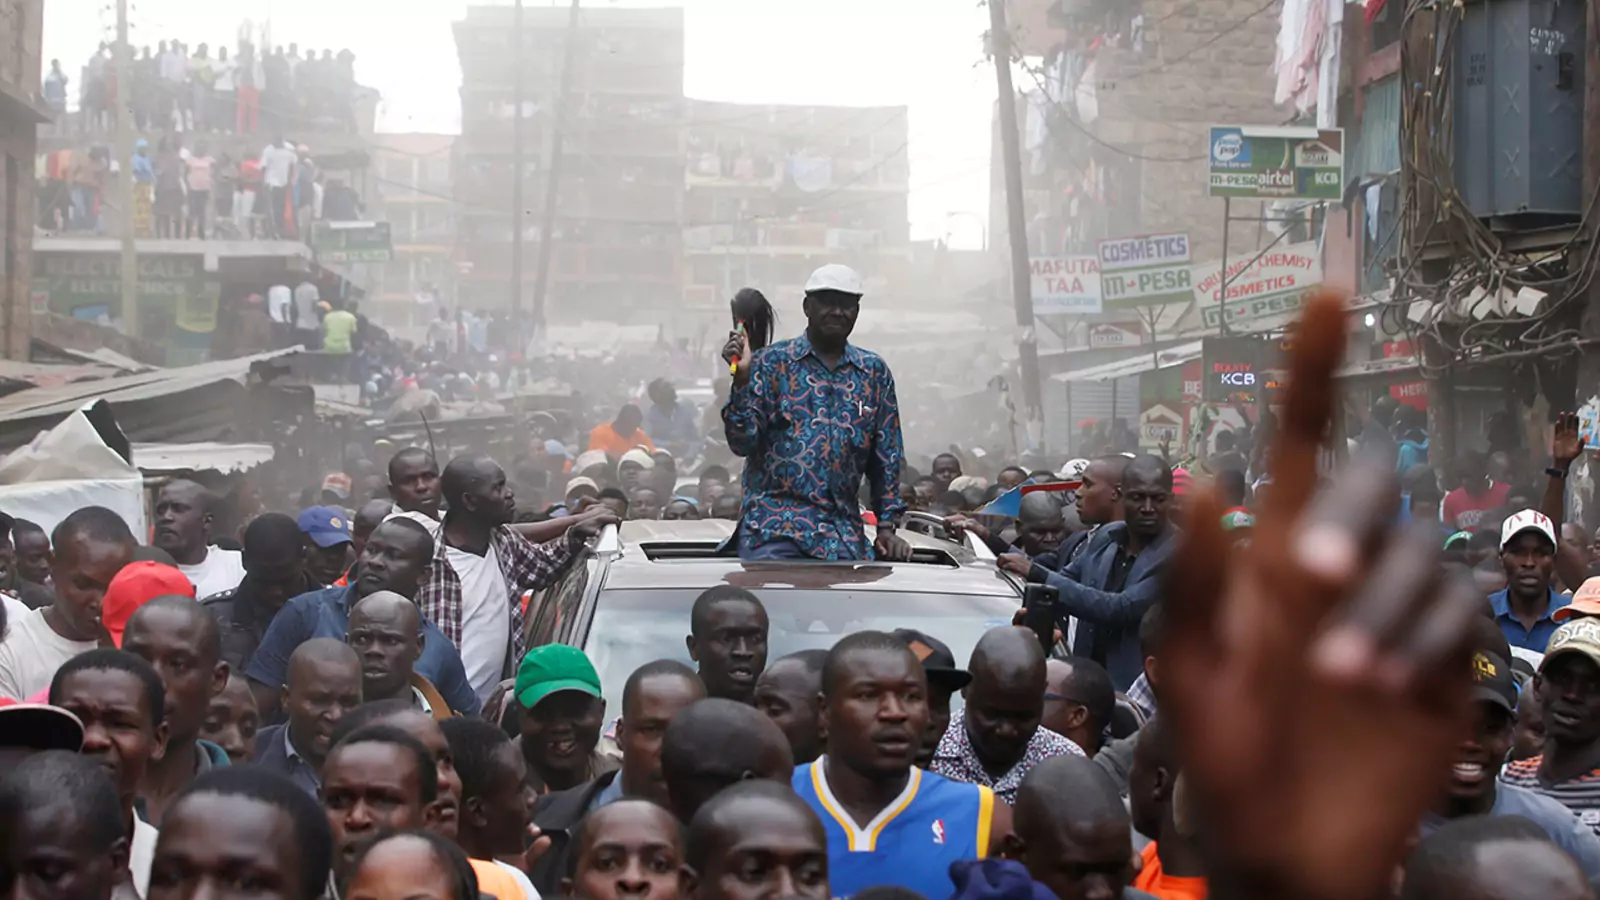 Opposition leader Raila Odinga greets supporters after a rally in Nairobi, Kenya.